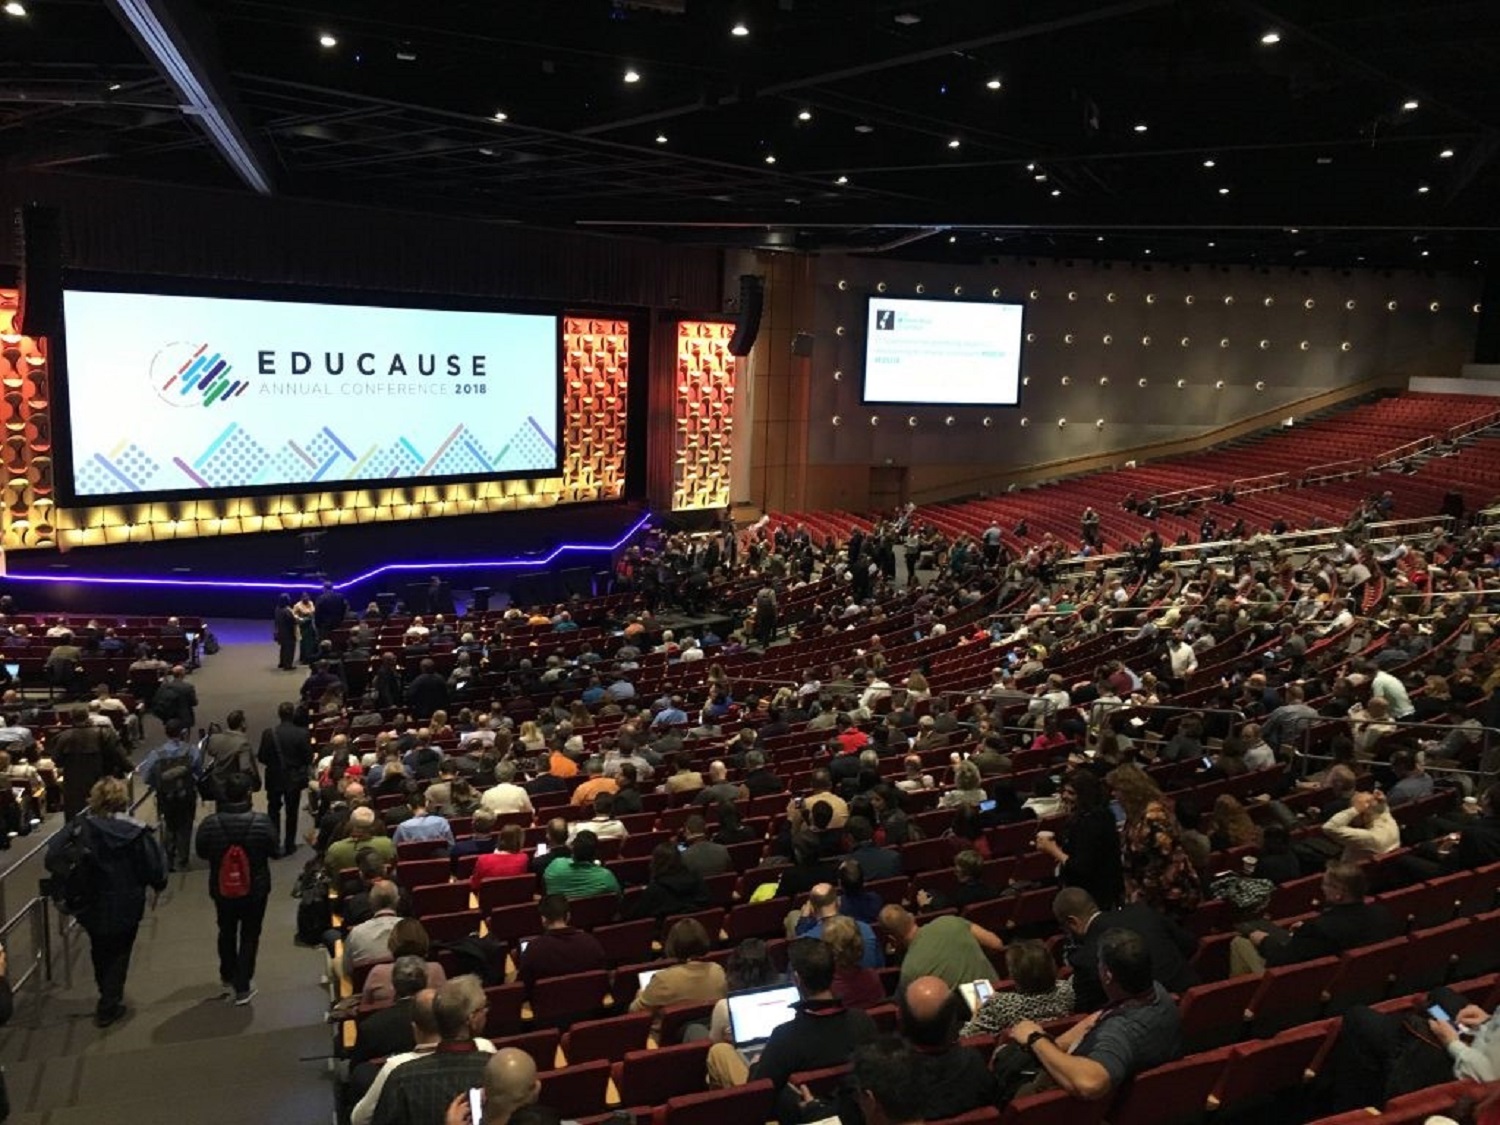 Photograph of Educase 18 annual conference lecture theatre with attendees